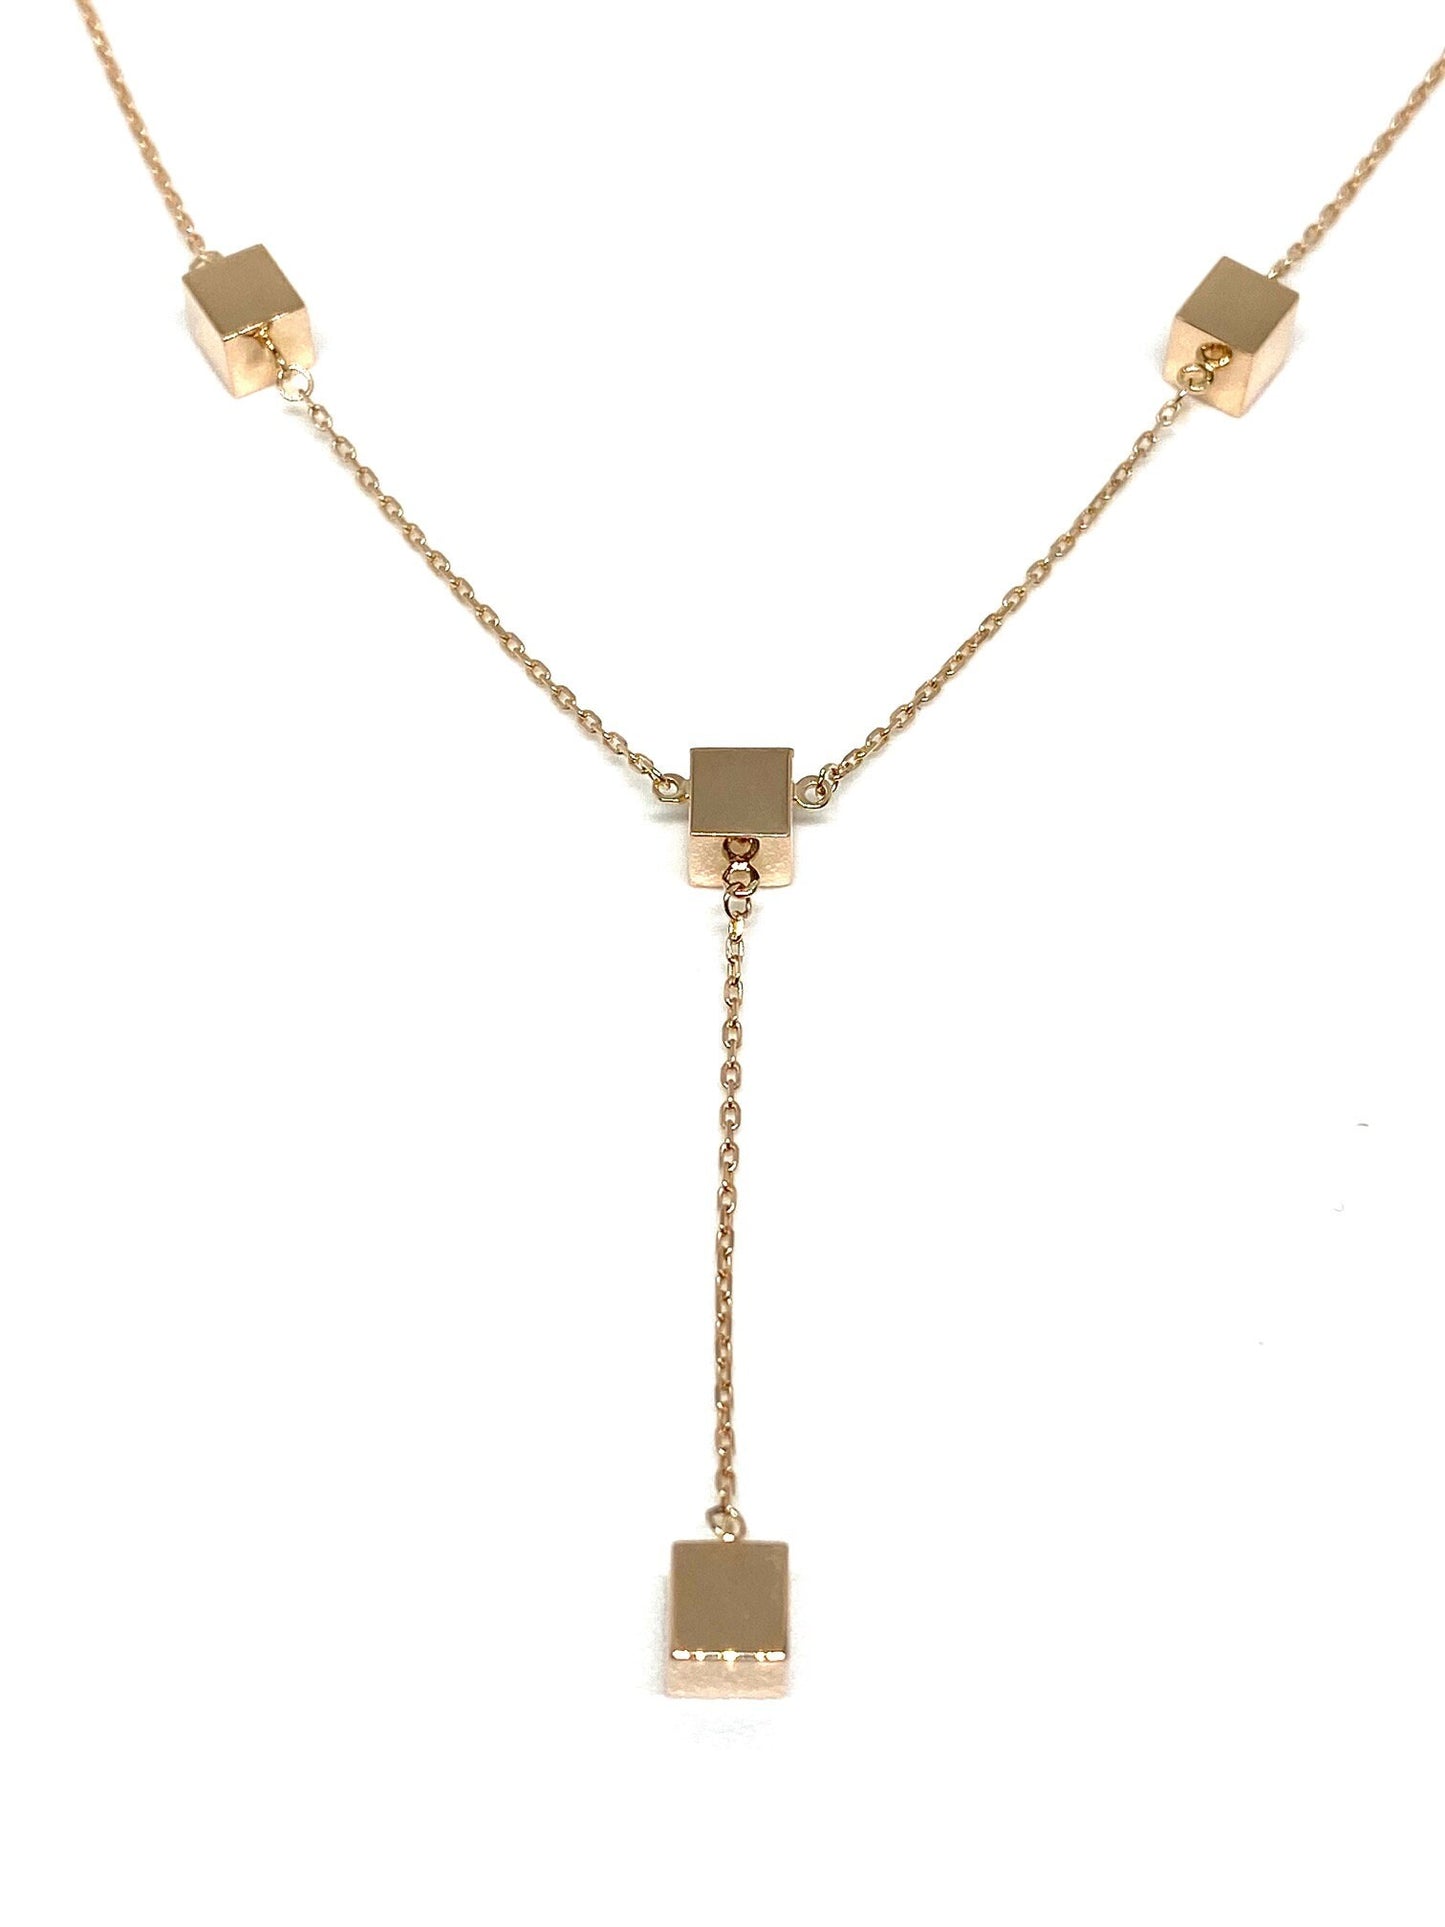 Rose Gold Square Cube Station Lariat Adjustable Chain Necklace